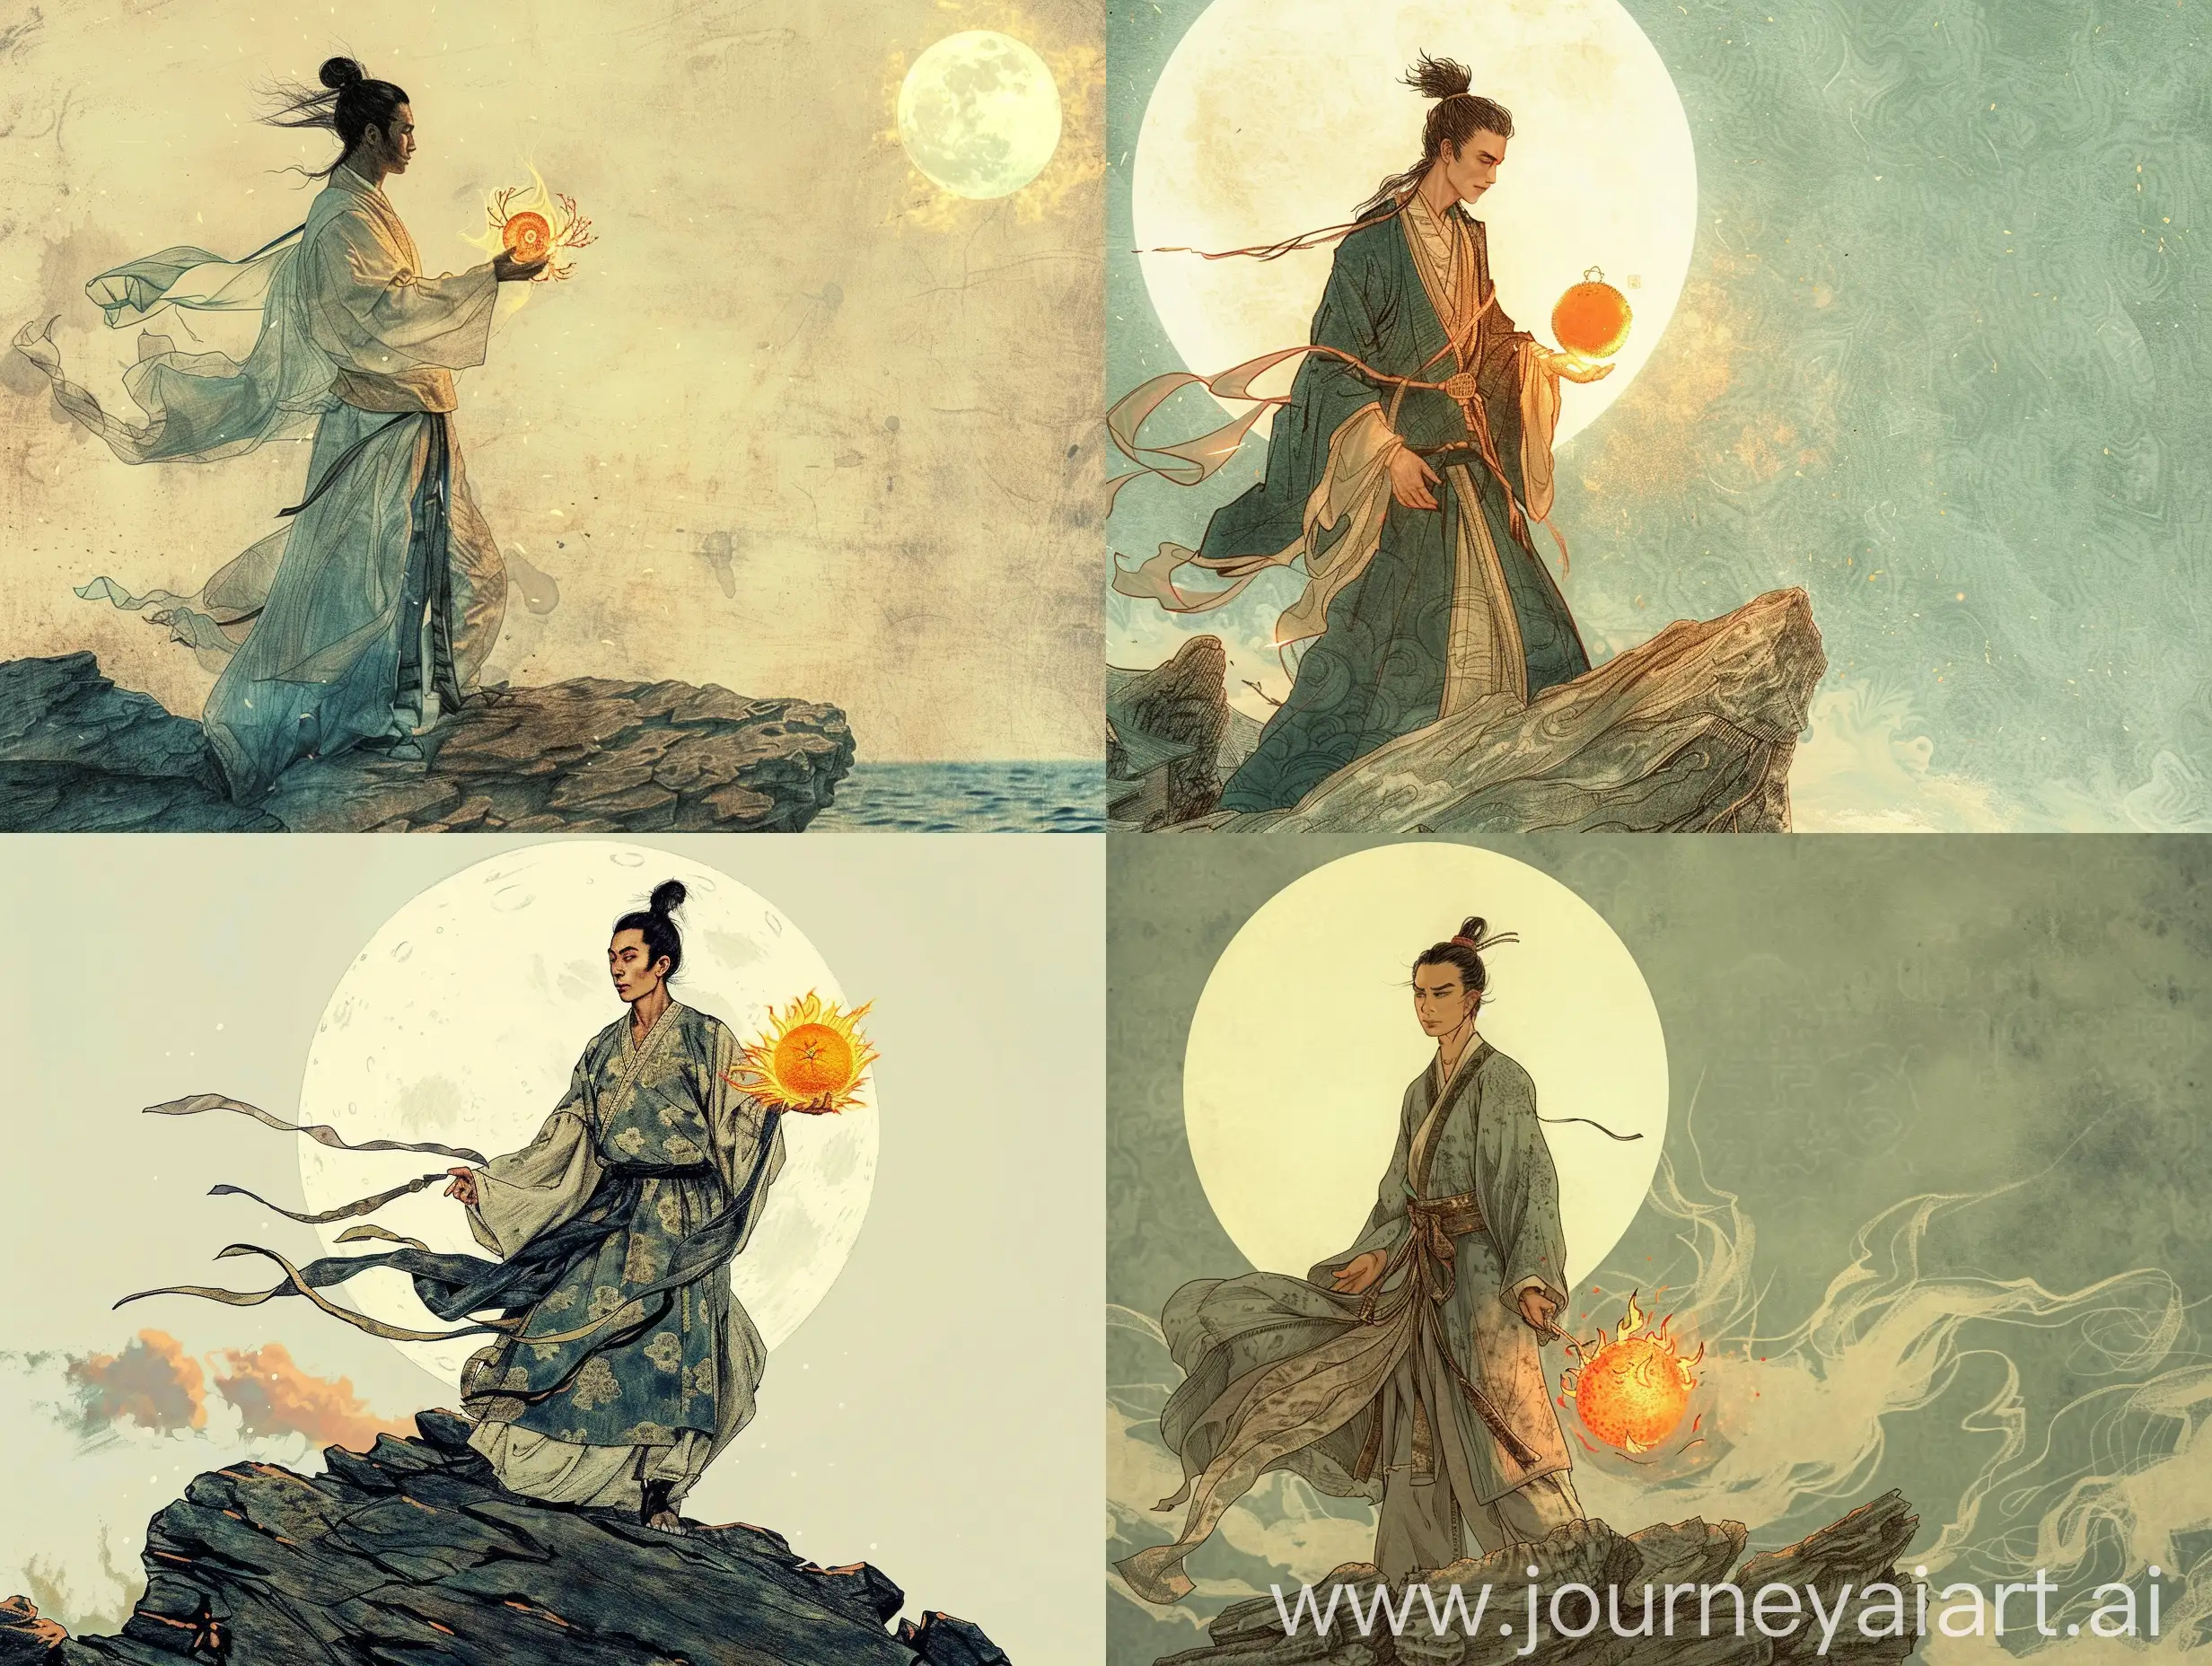 Zheng-Qiu-Standing-on-Lingxiao-Rock-with-Glowing-Wild-Orange-Chinese-Song-Dynasty-Portrait-in-Van-Gogh-Style